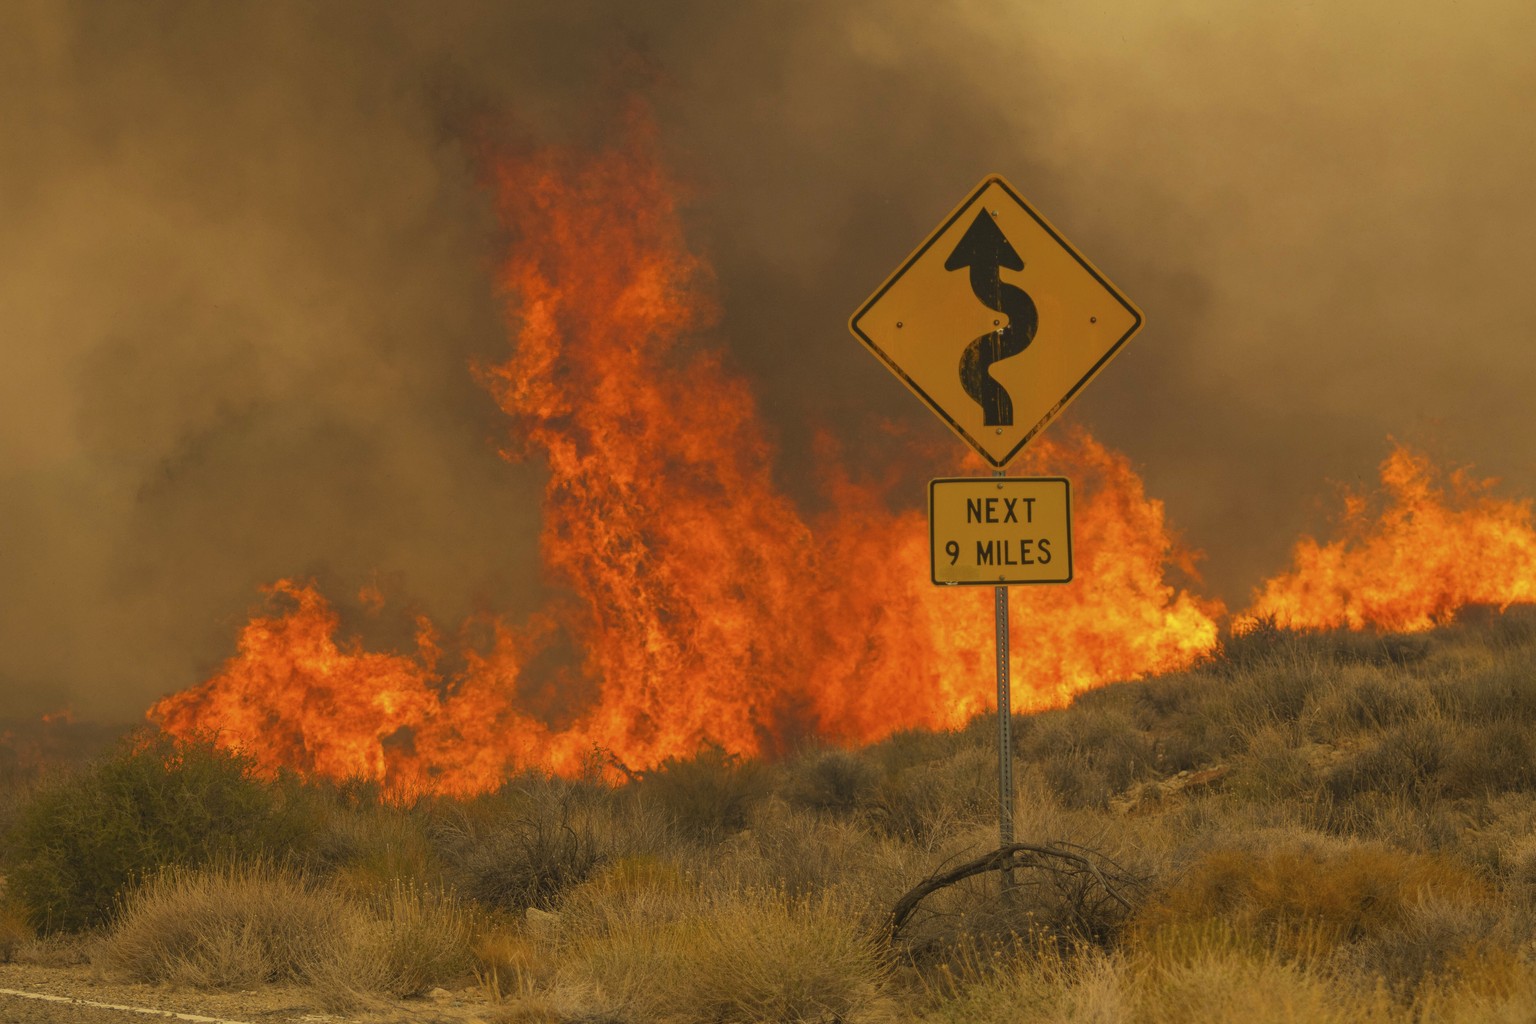 Flames rise from the York Fire on Ivanpah Rd. on Sunday, July 30, 2023, in the Mojave National Preserve, Calif. Crews battled ?fire whirls? in California?s Mojave National Preserve this weekend as a m ...